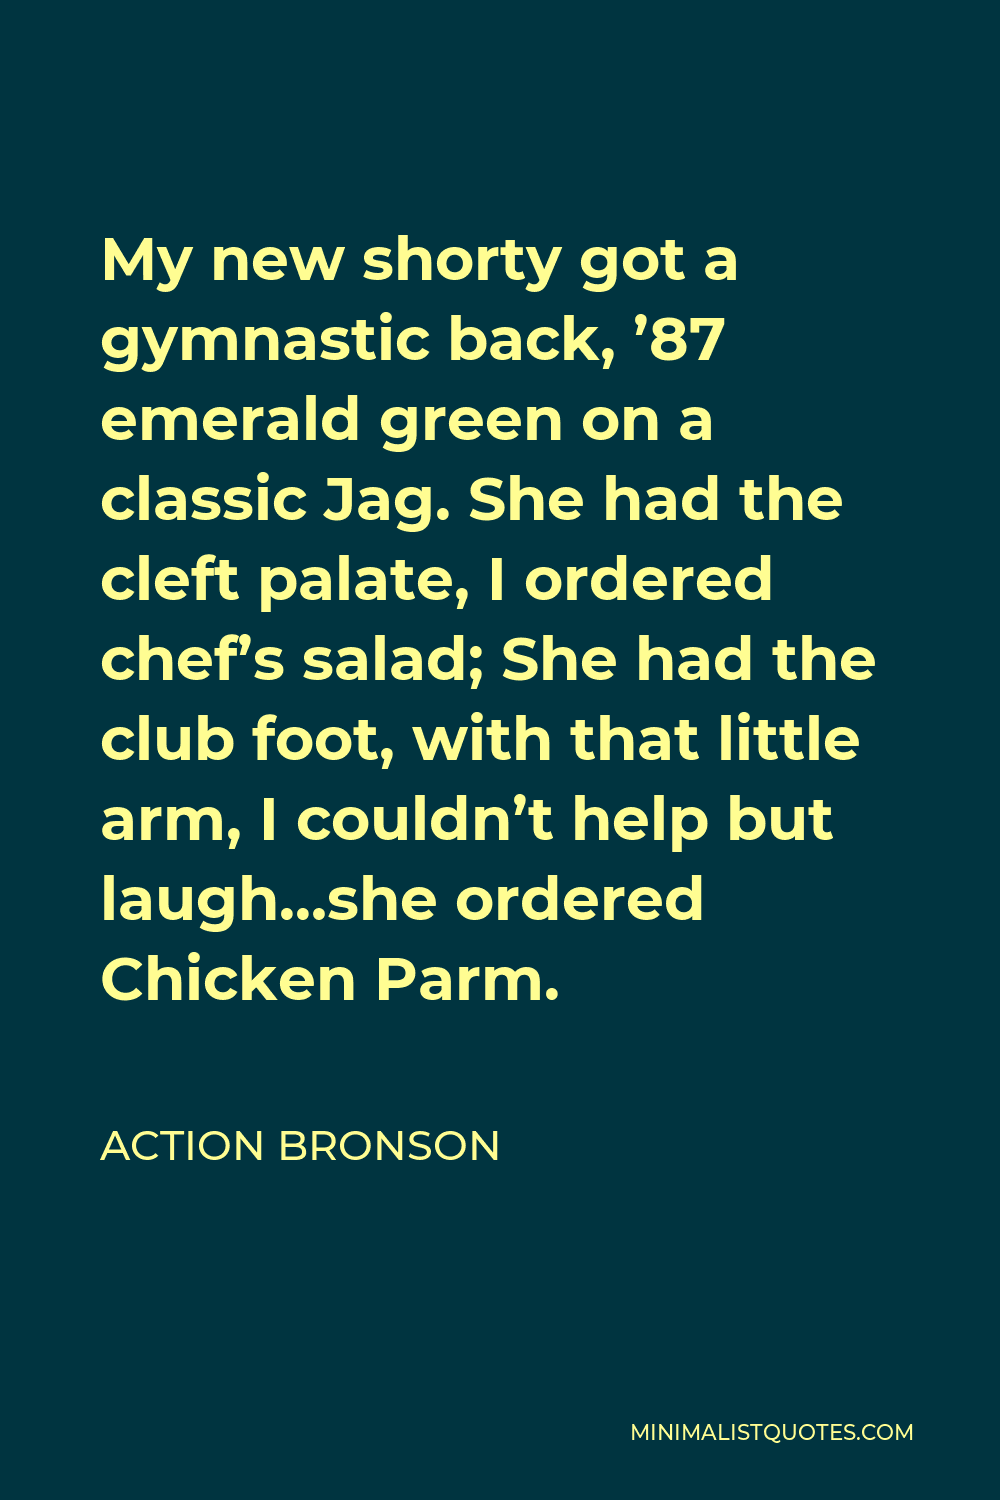 Action Bronson Quote - My new shorty got a gymnastic back, ’87 emerald green on a classic Jag. She had the cleft palate, I ordered chef’s salad; She had the club foot, with that little arm, I couldn’t help but laugh…she ordered Chicken Parm.